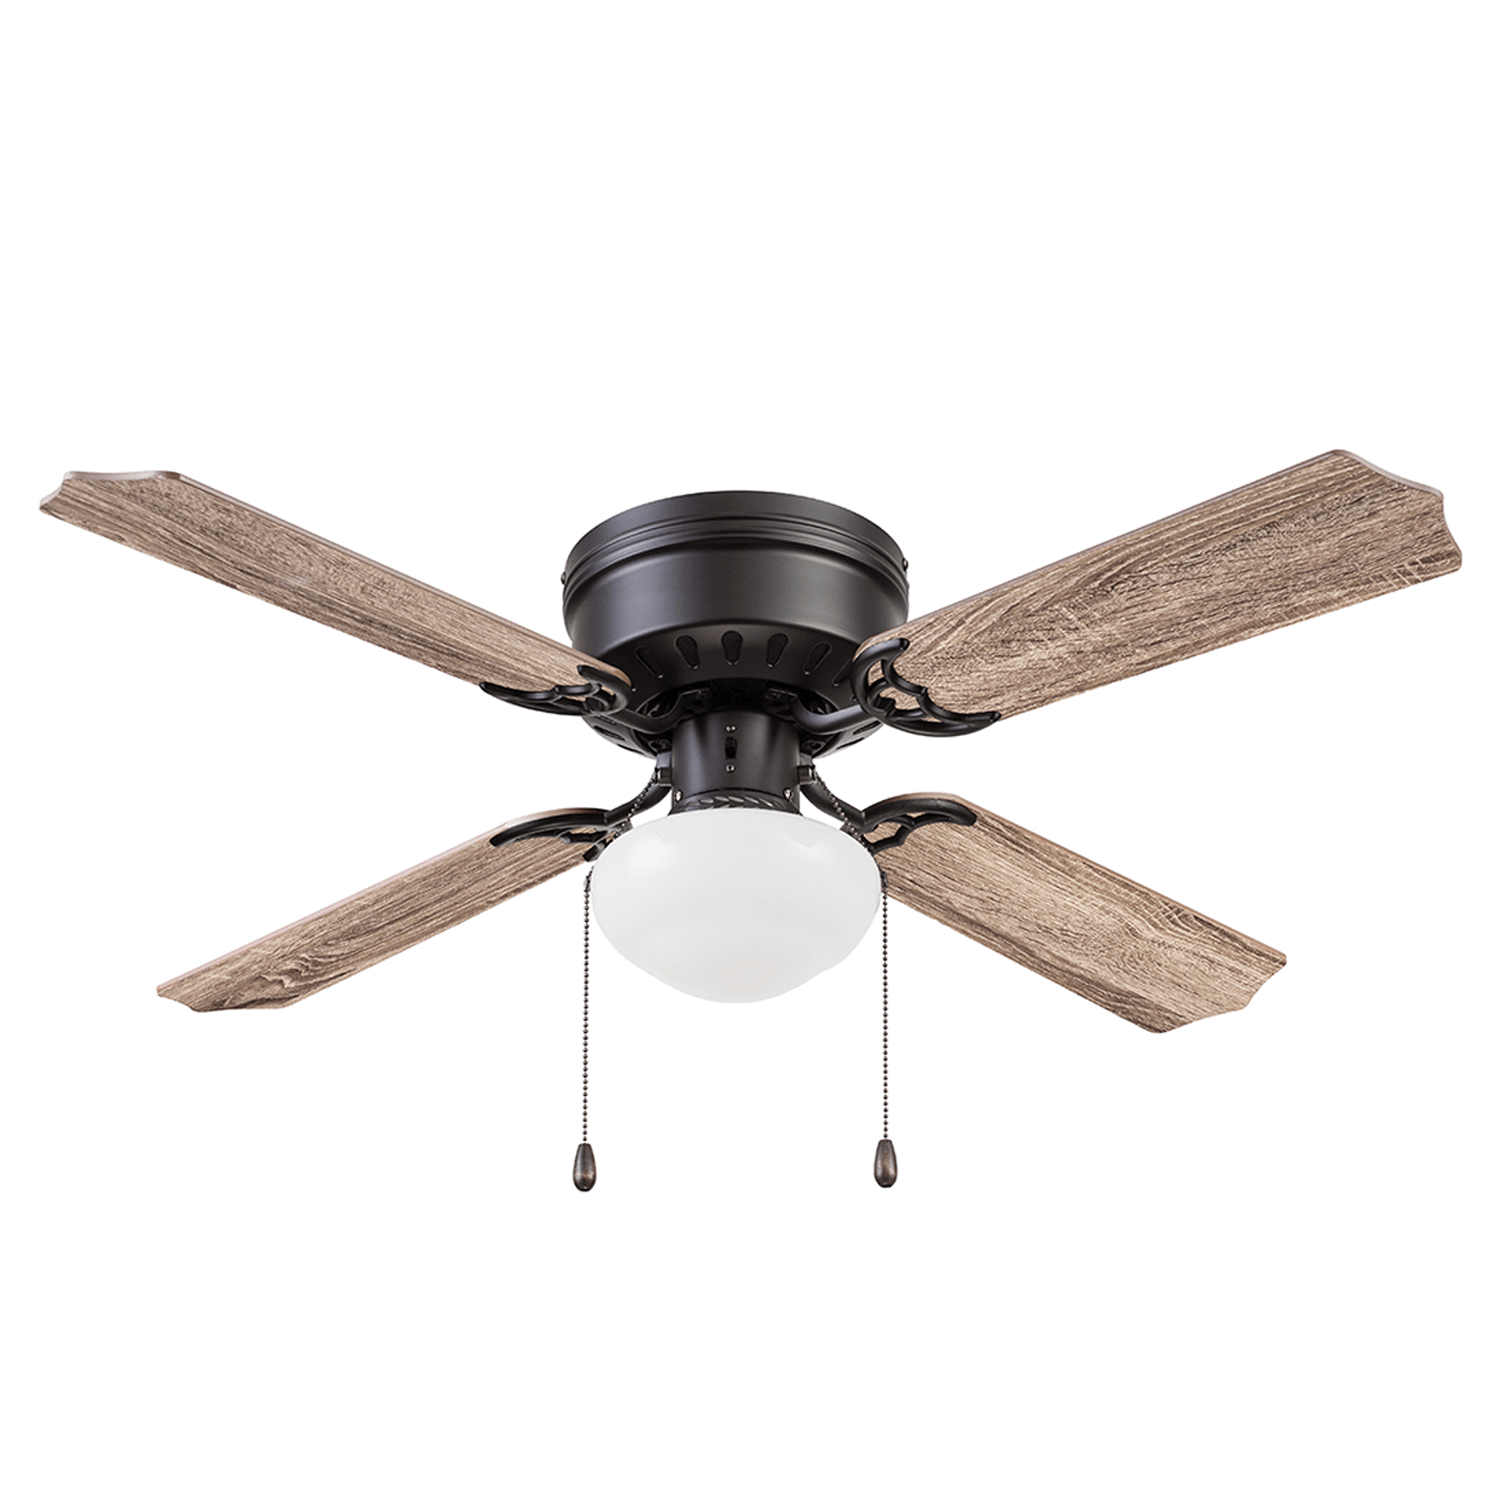 42 Inch Cherry Hill, Espresso Bronze, Pull Chain, Ceiling Fan by Prominence Home